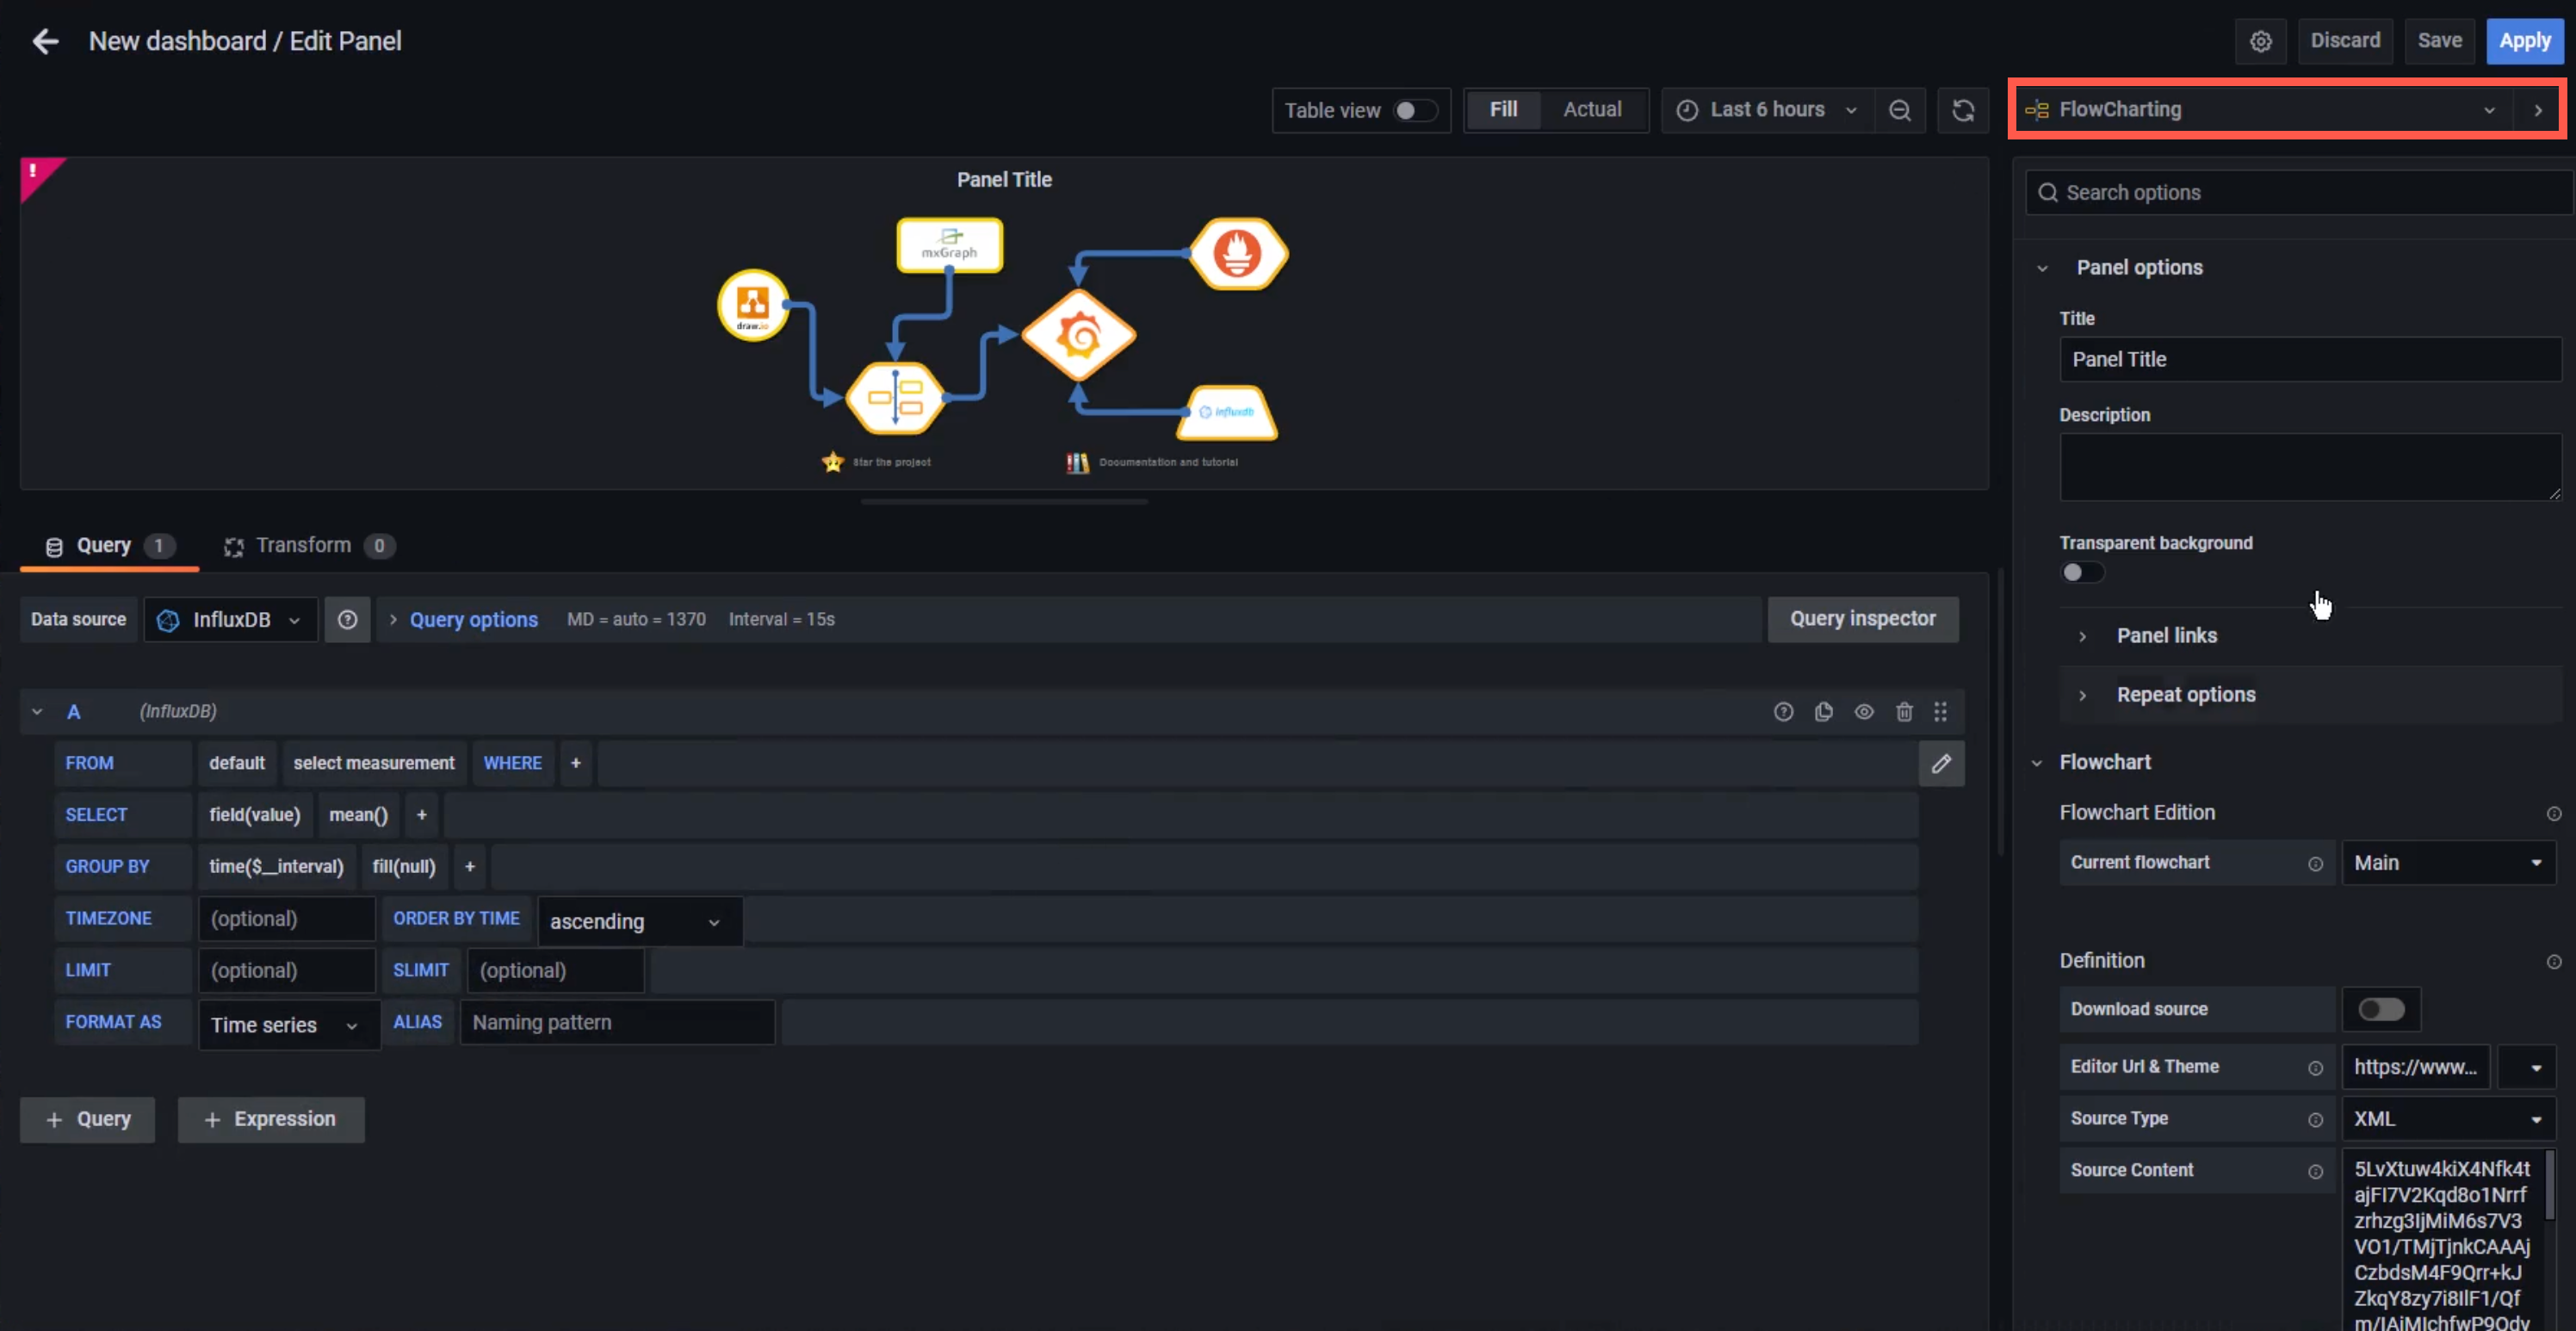 Install Grafana, connect a database and create a dashboard with the Flowcharting plugin - you can add the .drawio diagram in the next step